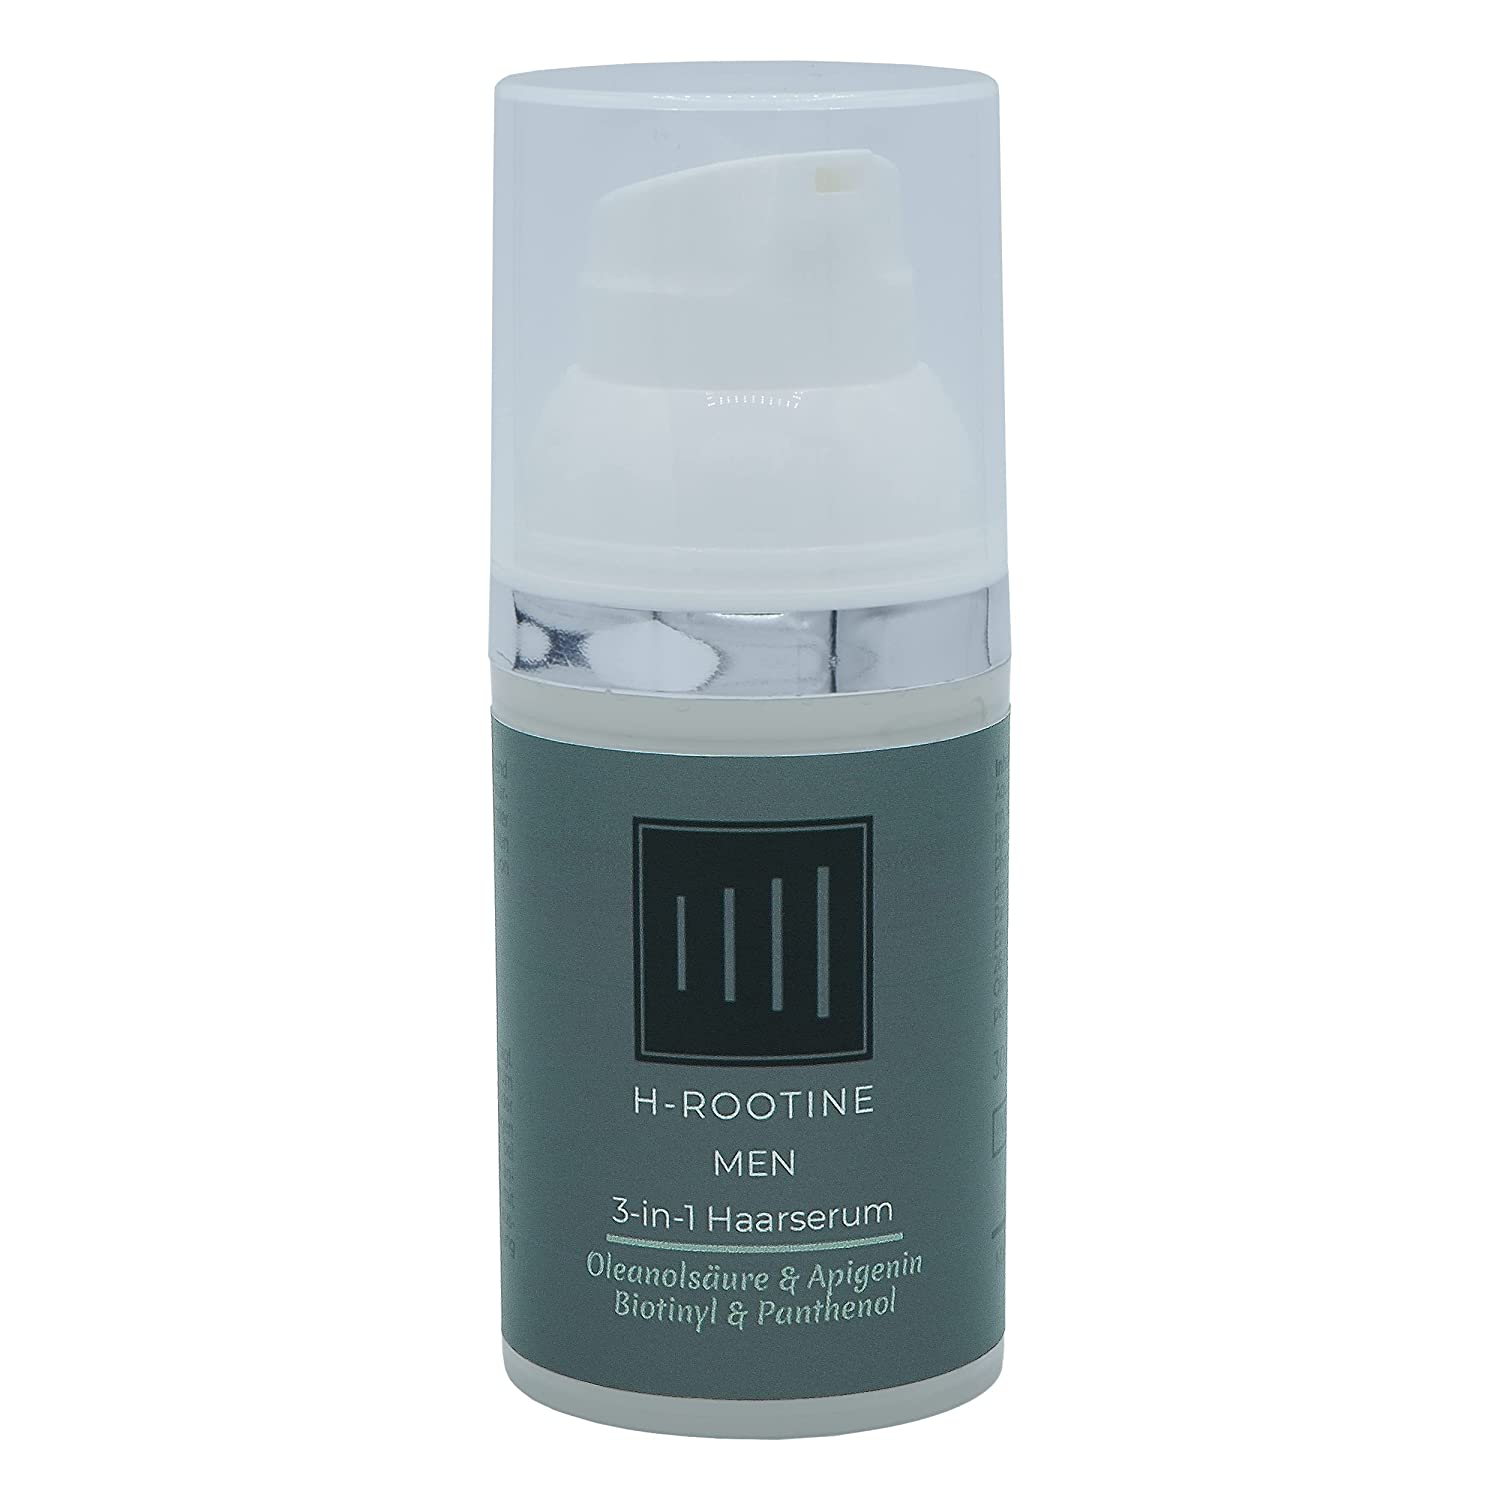 H-ROOTINE Hair Serum for Men (30 ml) • Hair Growth Agent Men • Stops Hereditary & Hormonal Hair Loss • Promotes Hair Growth